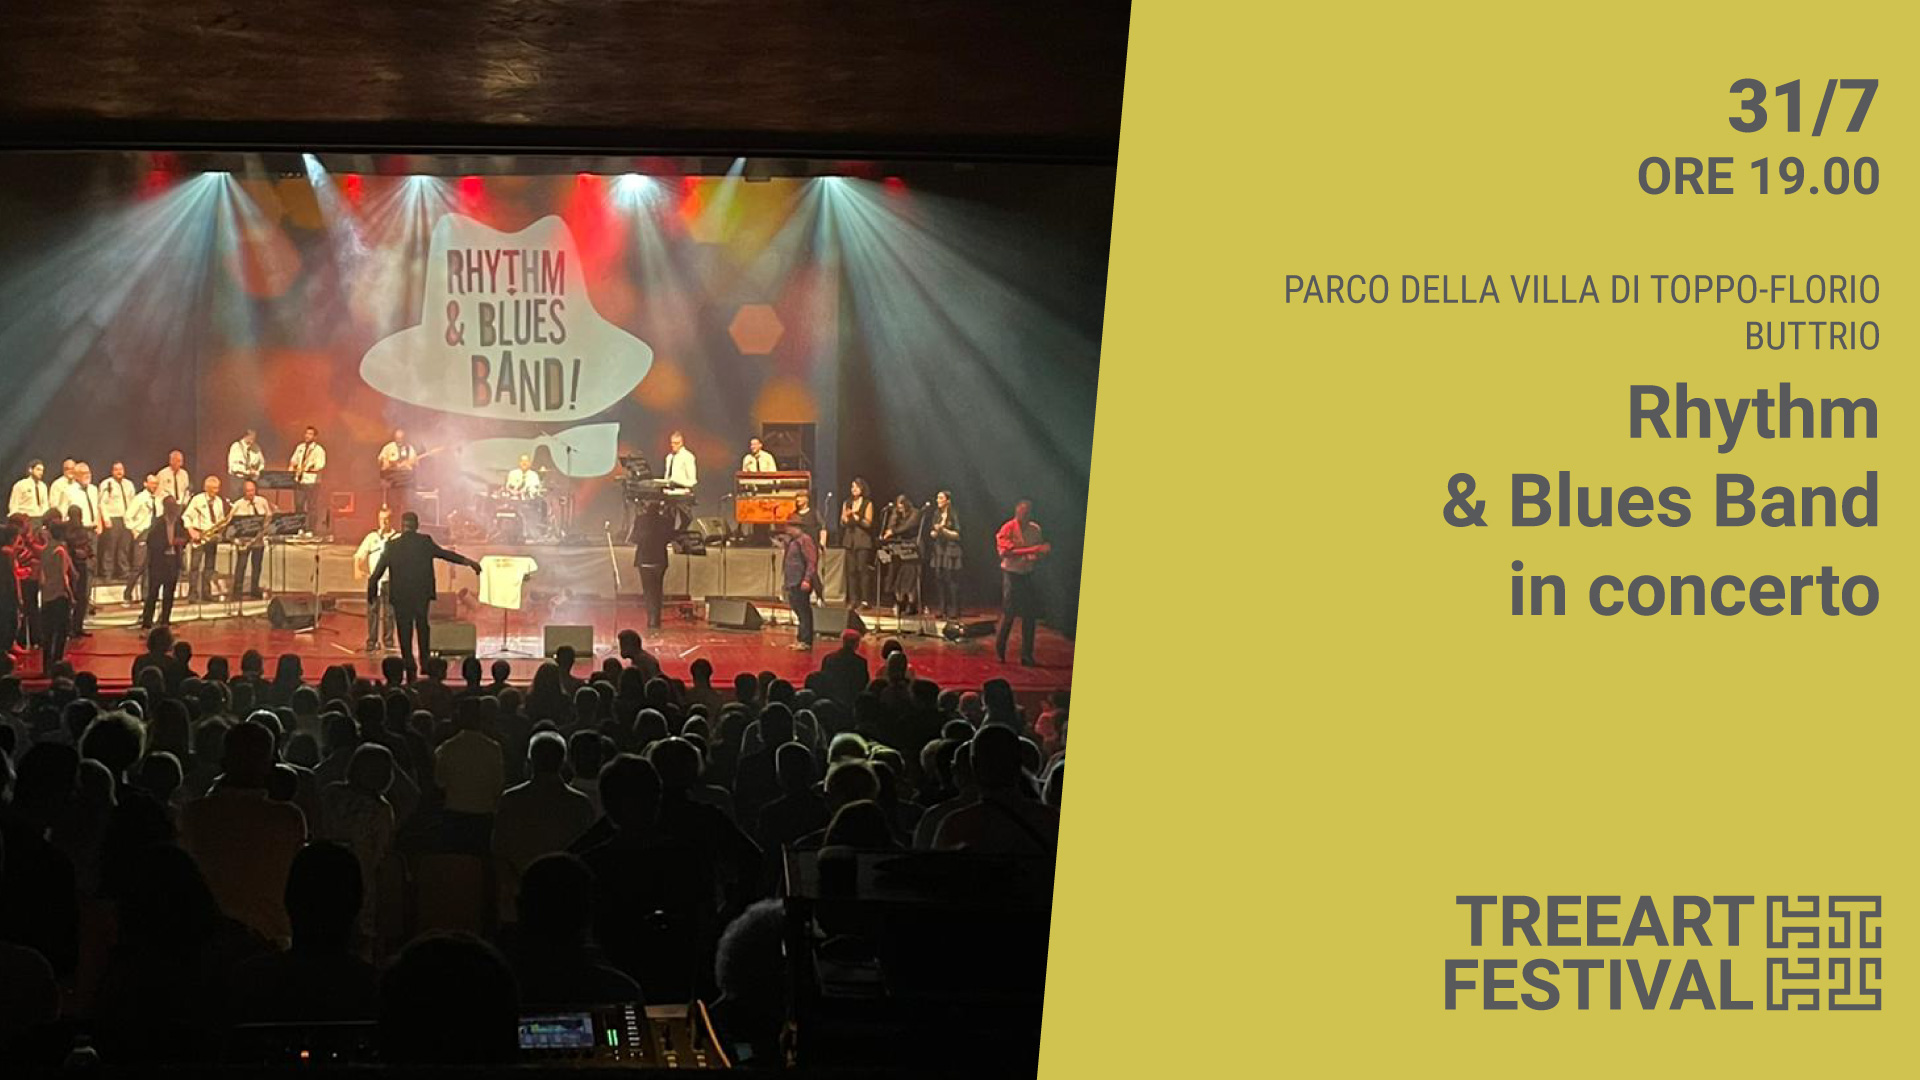 The Rhythm & Blues Band in concerto